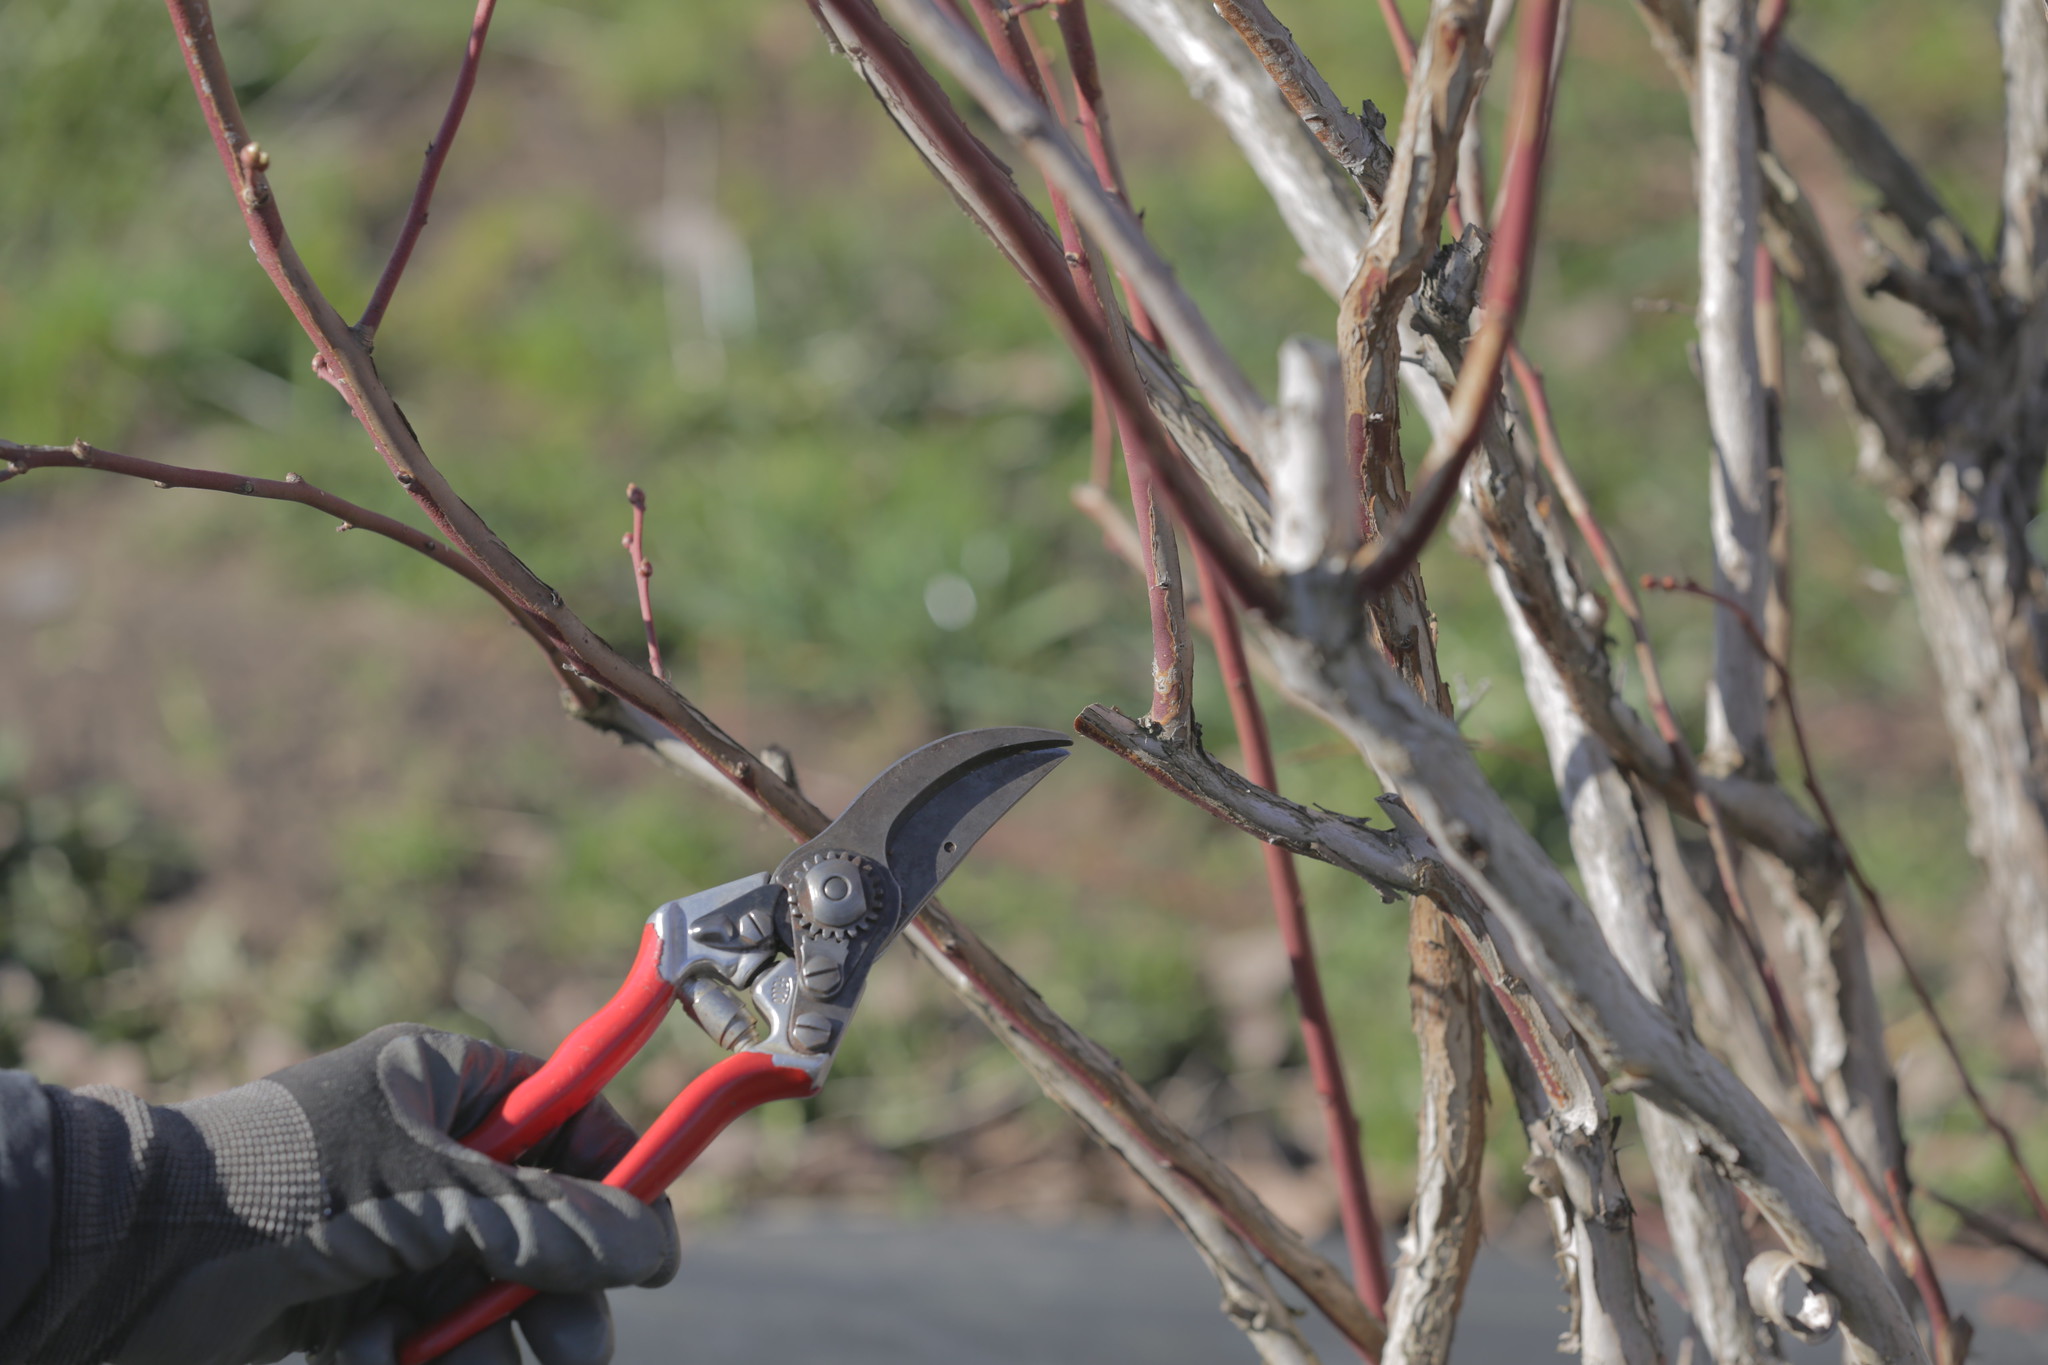 Learn about pruning berries, kiwifruit and grapes in online classes